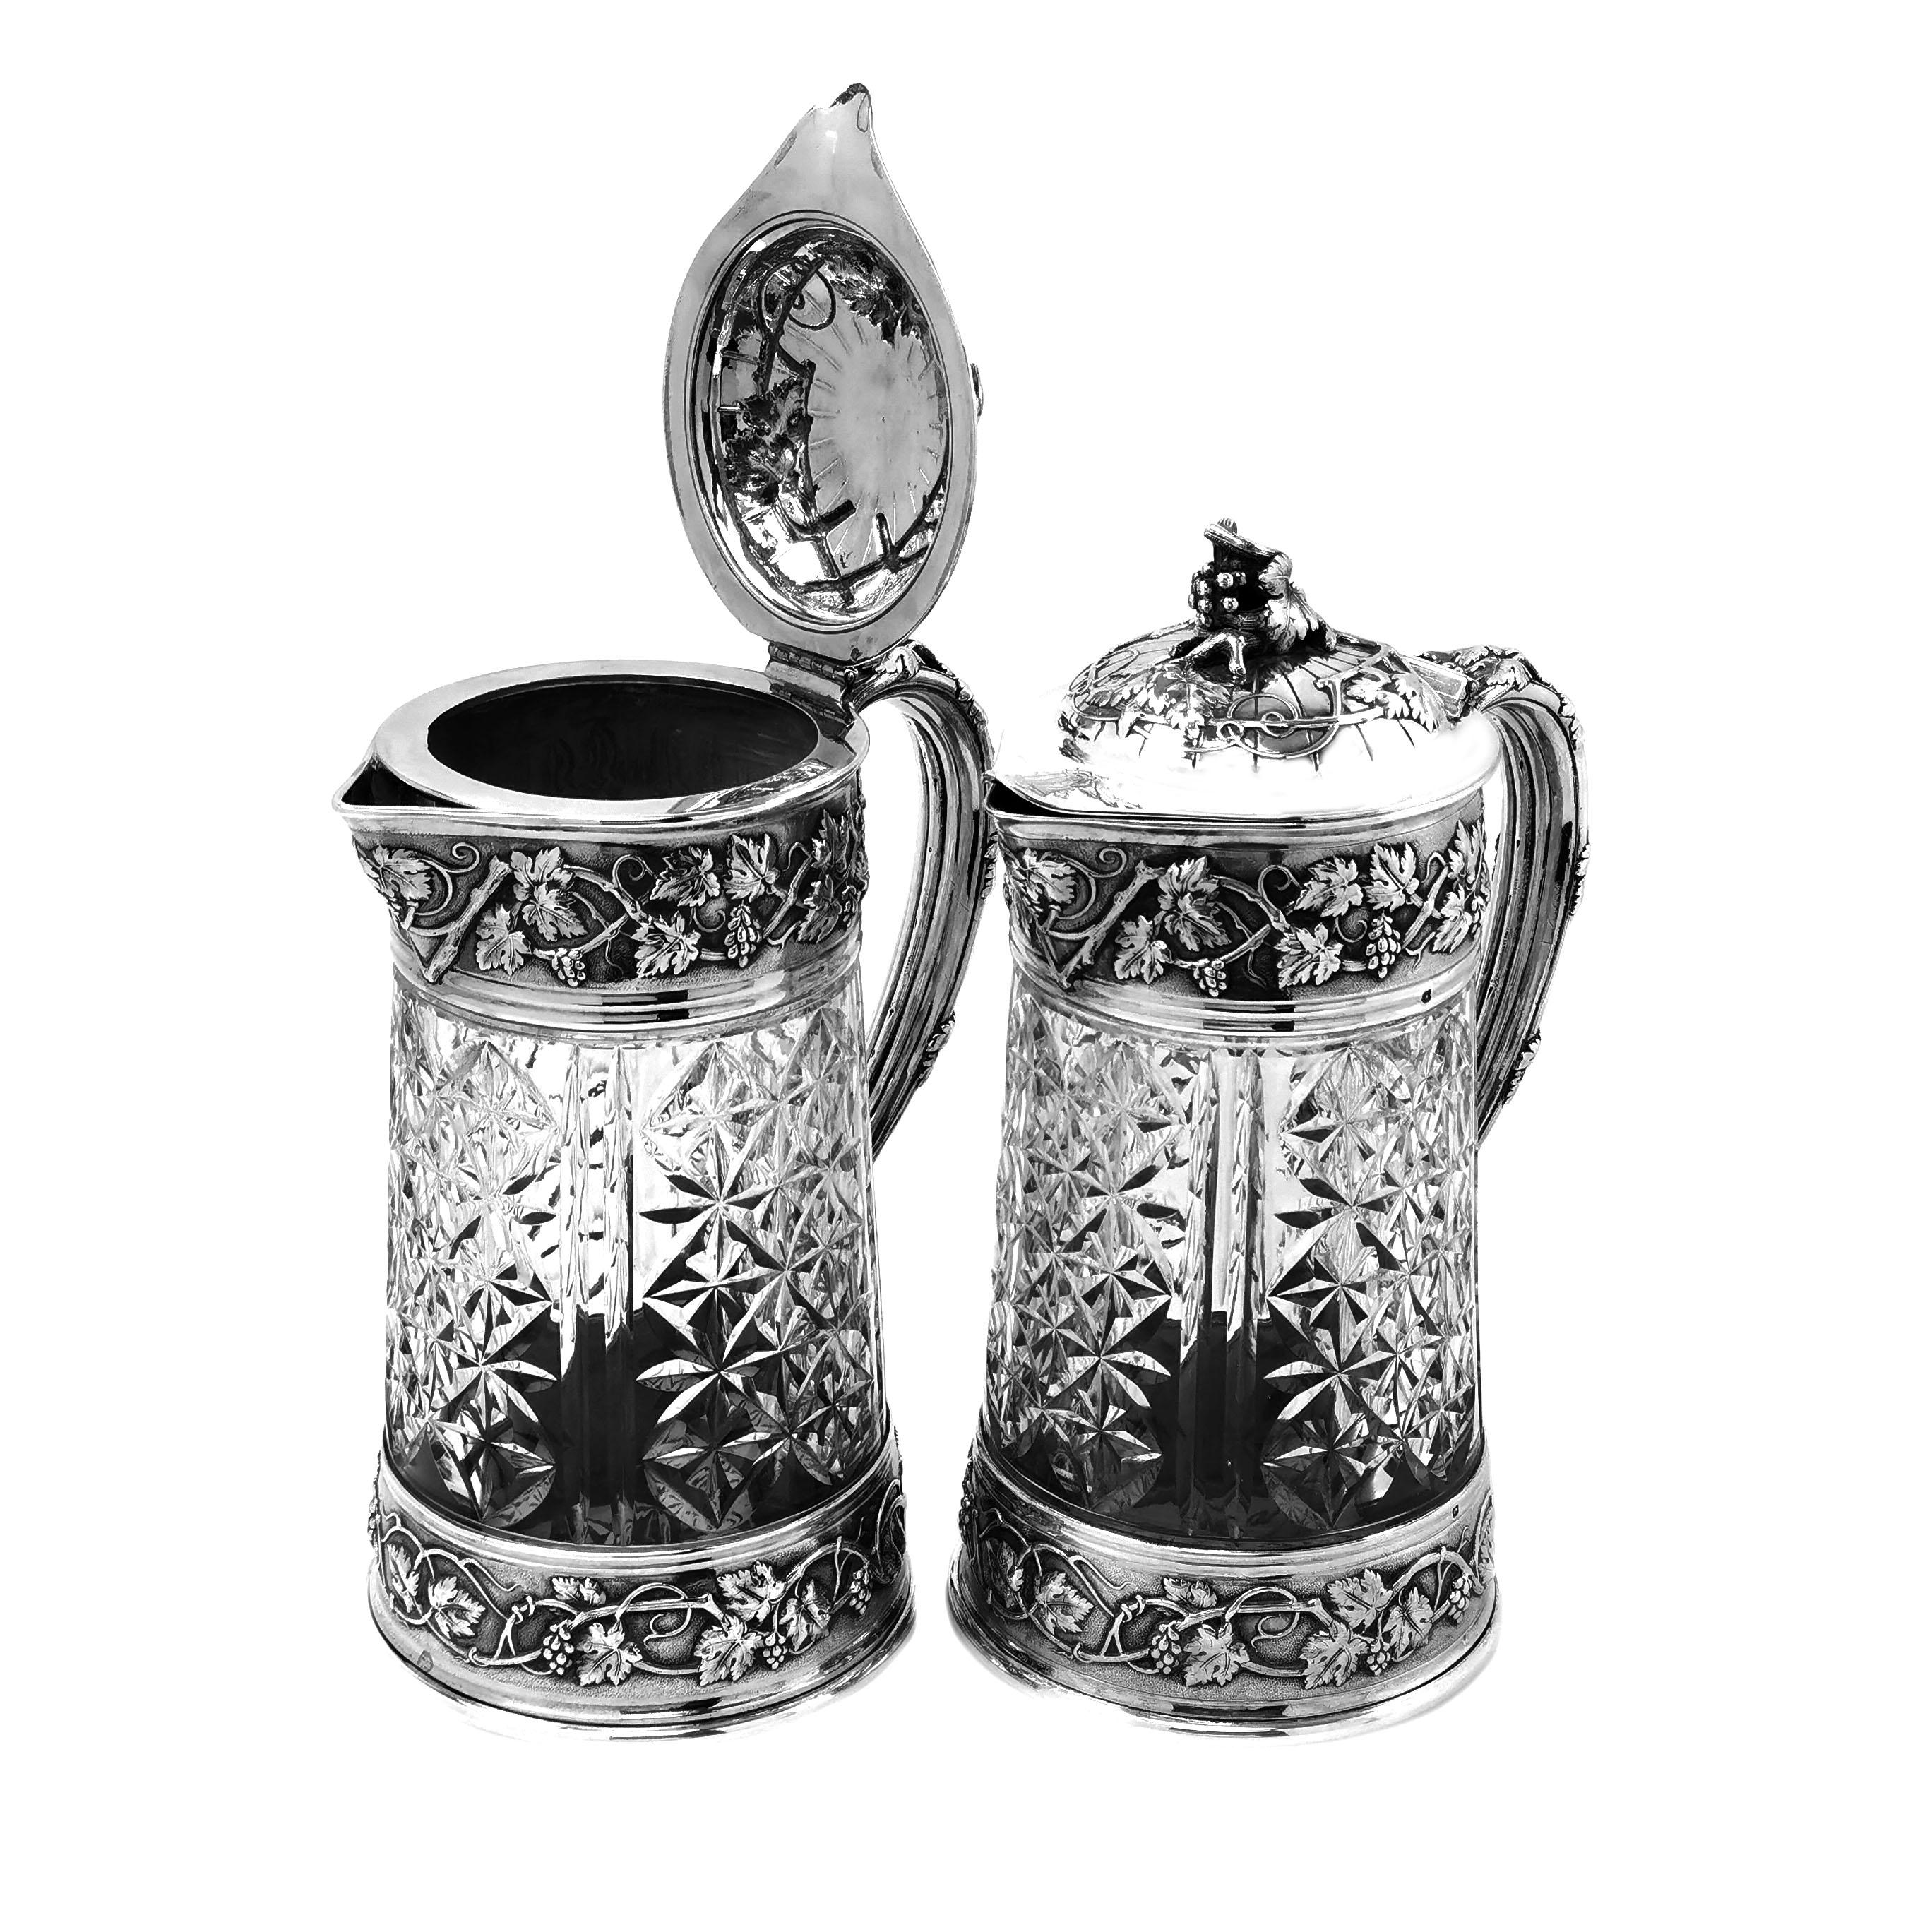 Pair of Antique French Silver and Glass Claret Jugs / Wine Decanters Odiot c1870 1